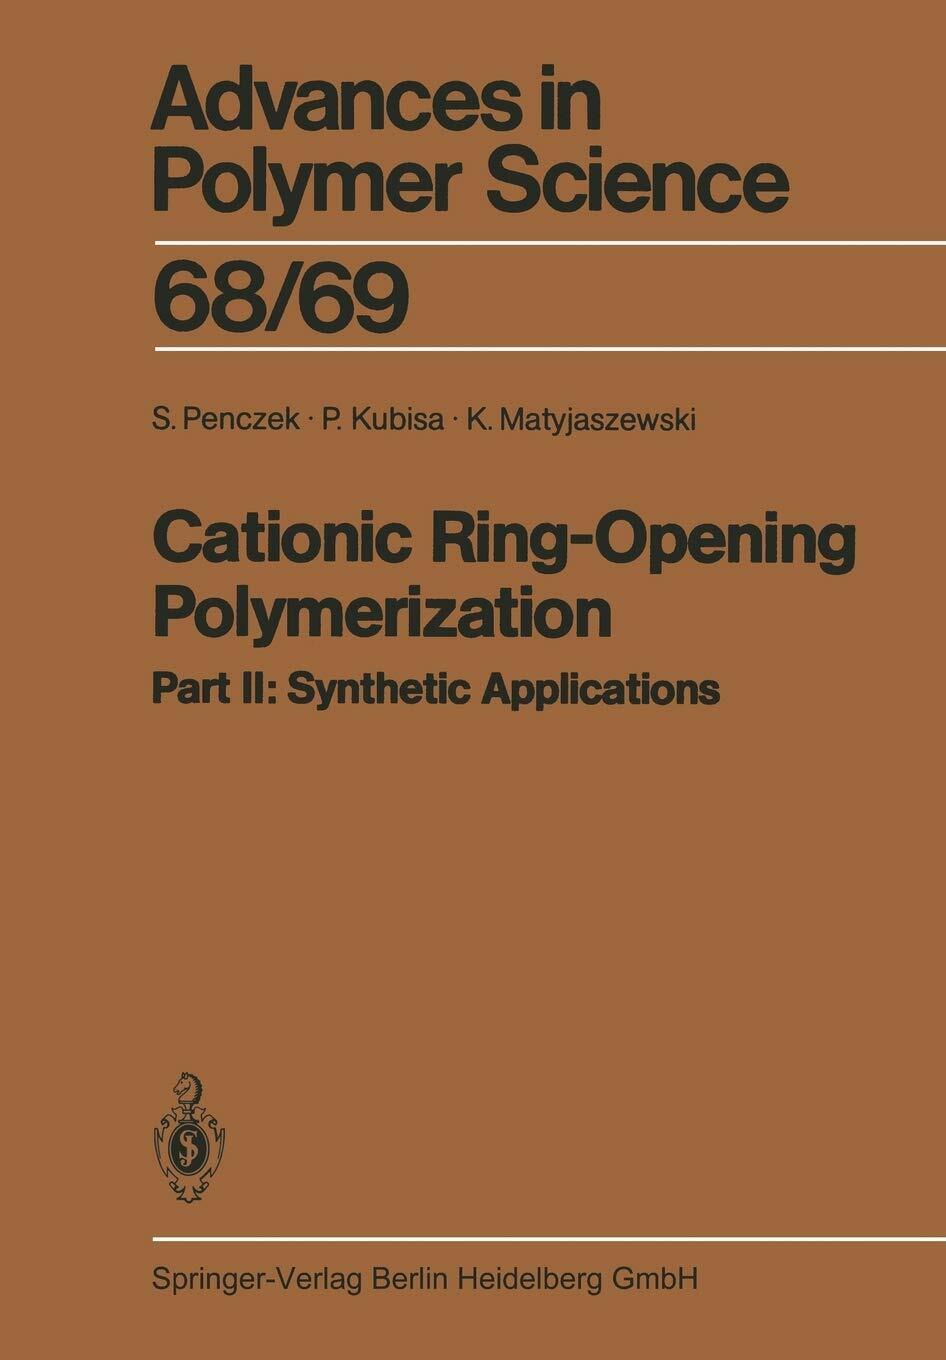 Cationic Ring-Opening Polymerization - Springer, 2013